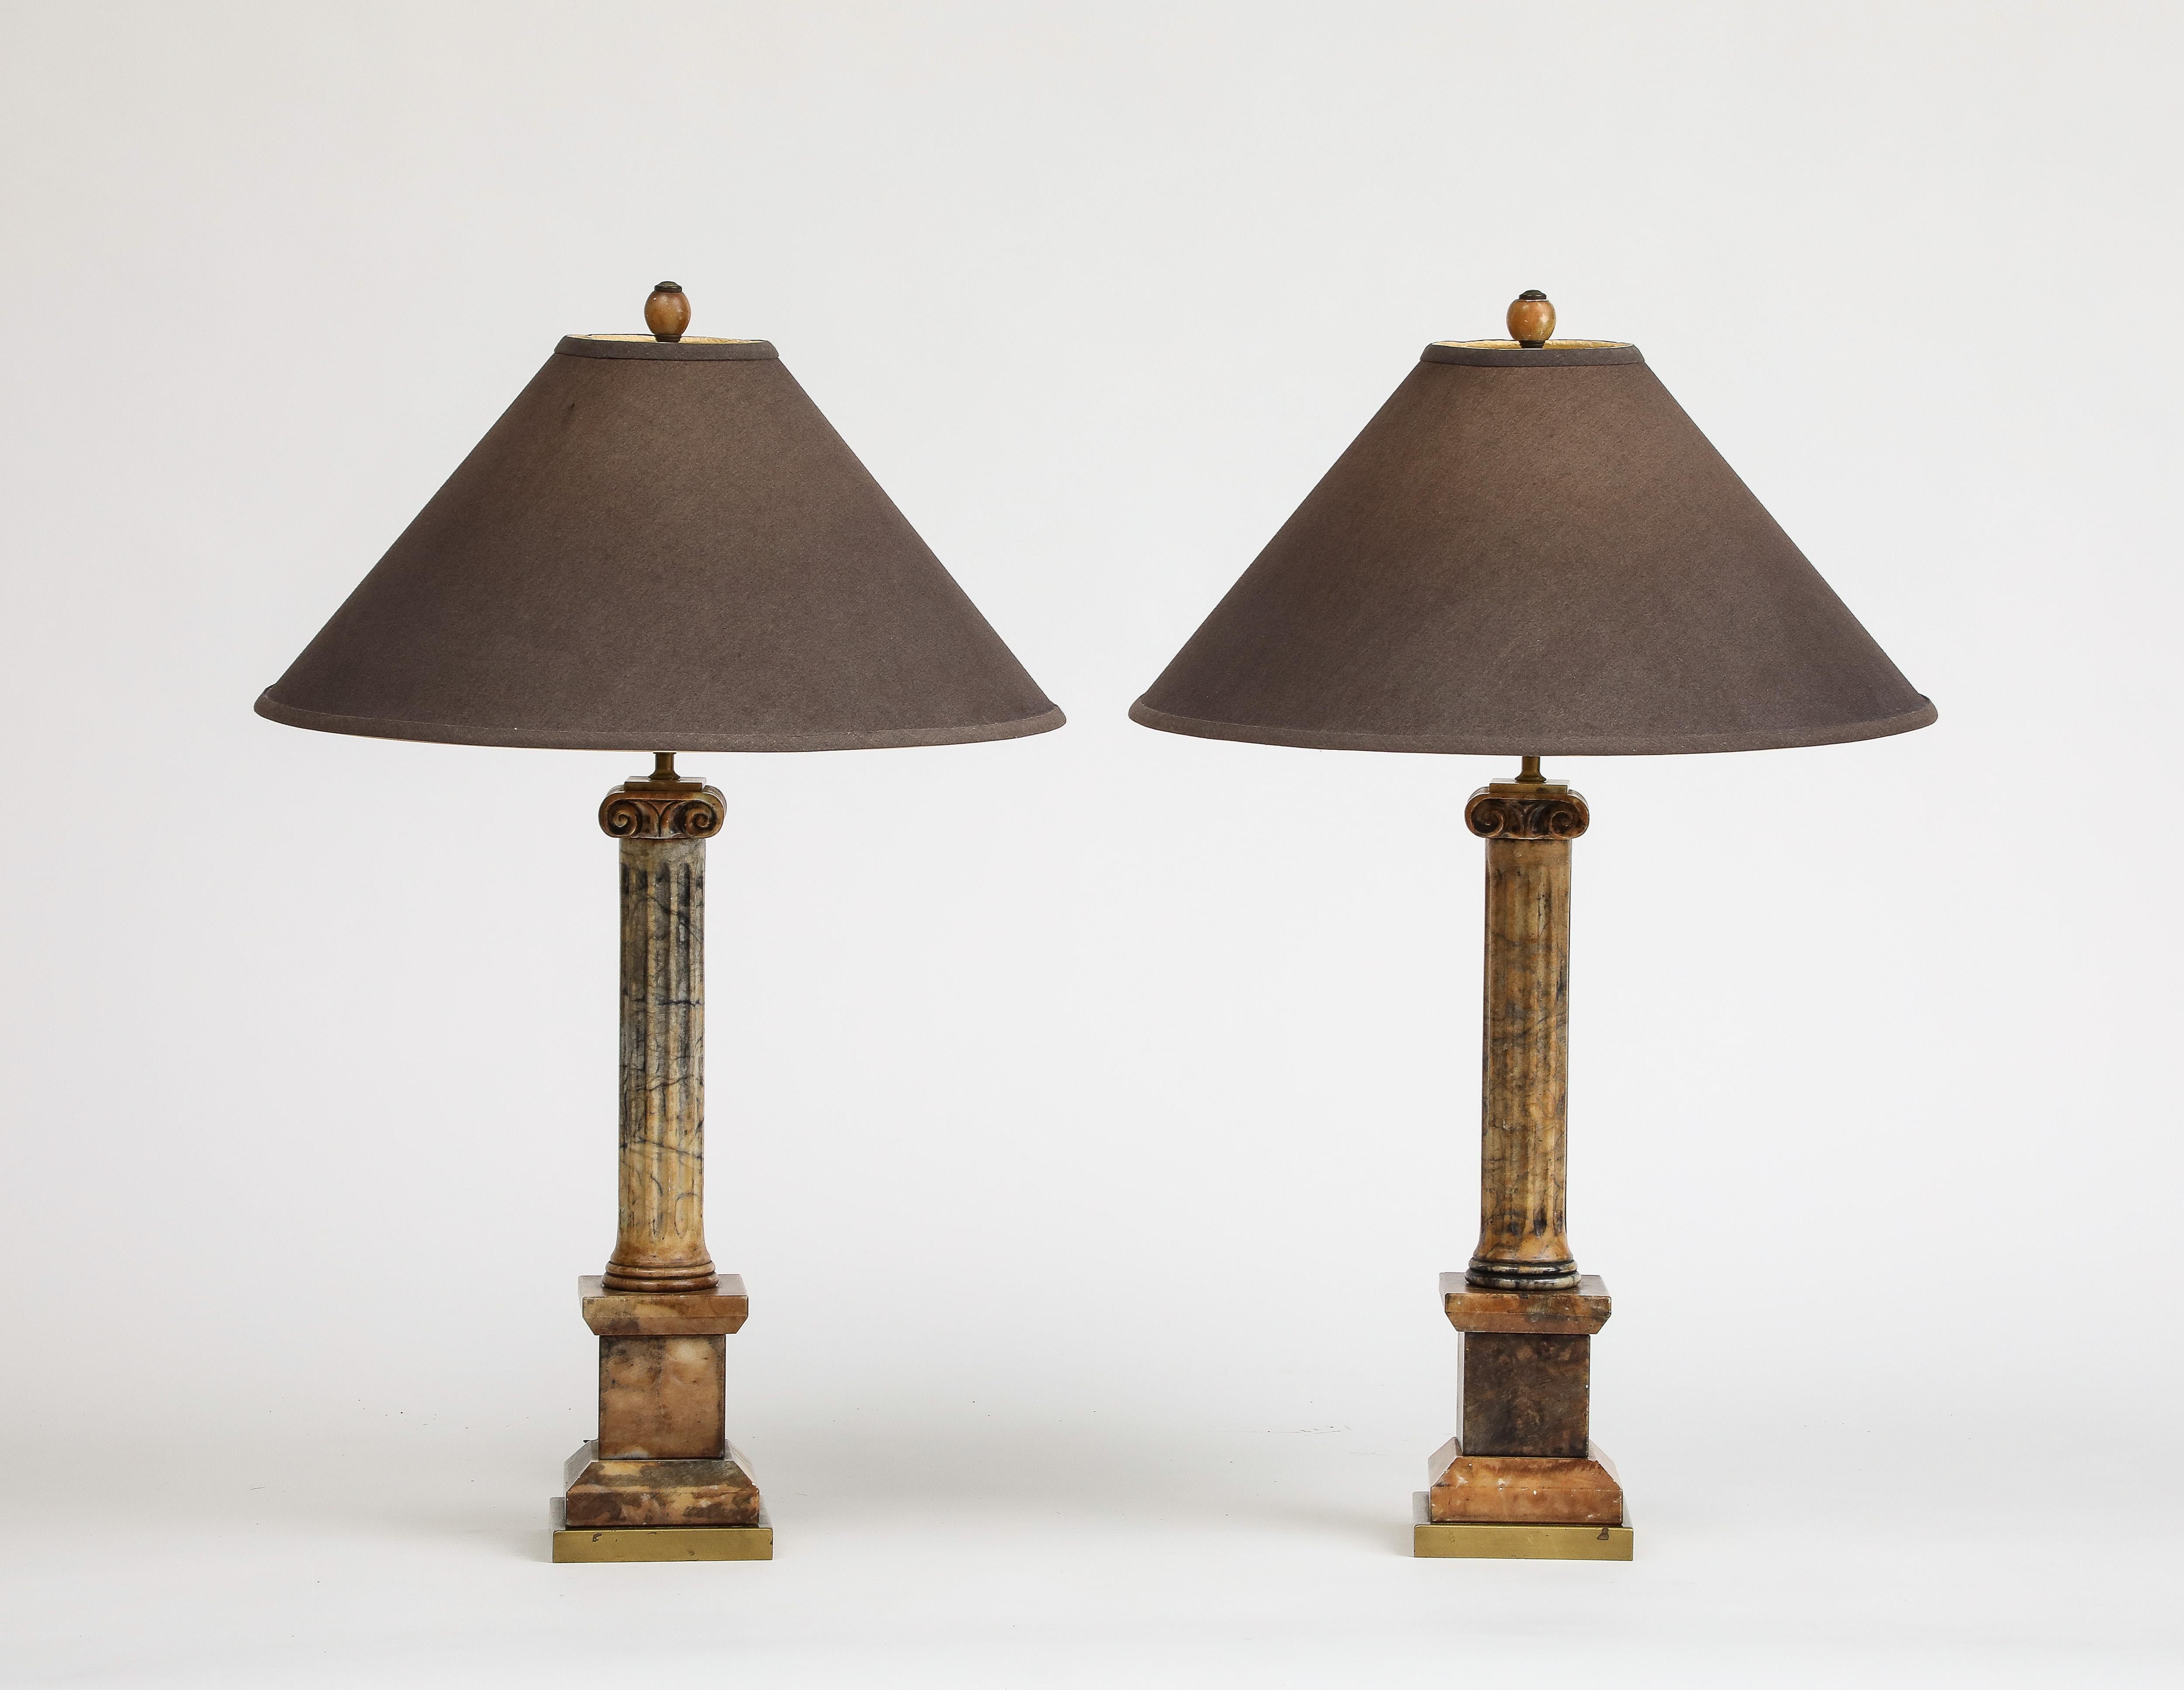 Pair of Italian 19th Century marble table lamps, carved into columns sitting atop prominent marble pedestals, with tan linen cone lampshades. 1 socket per lamp. 